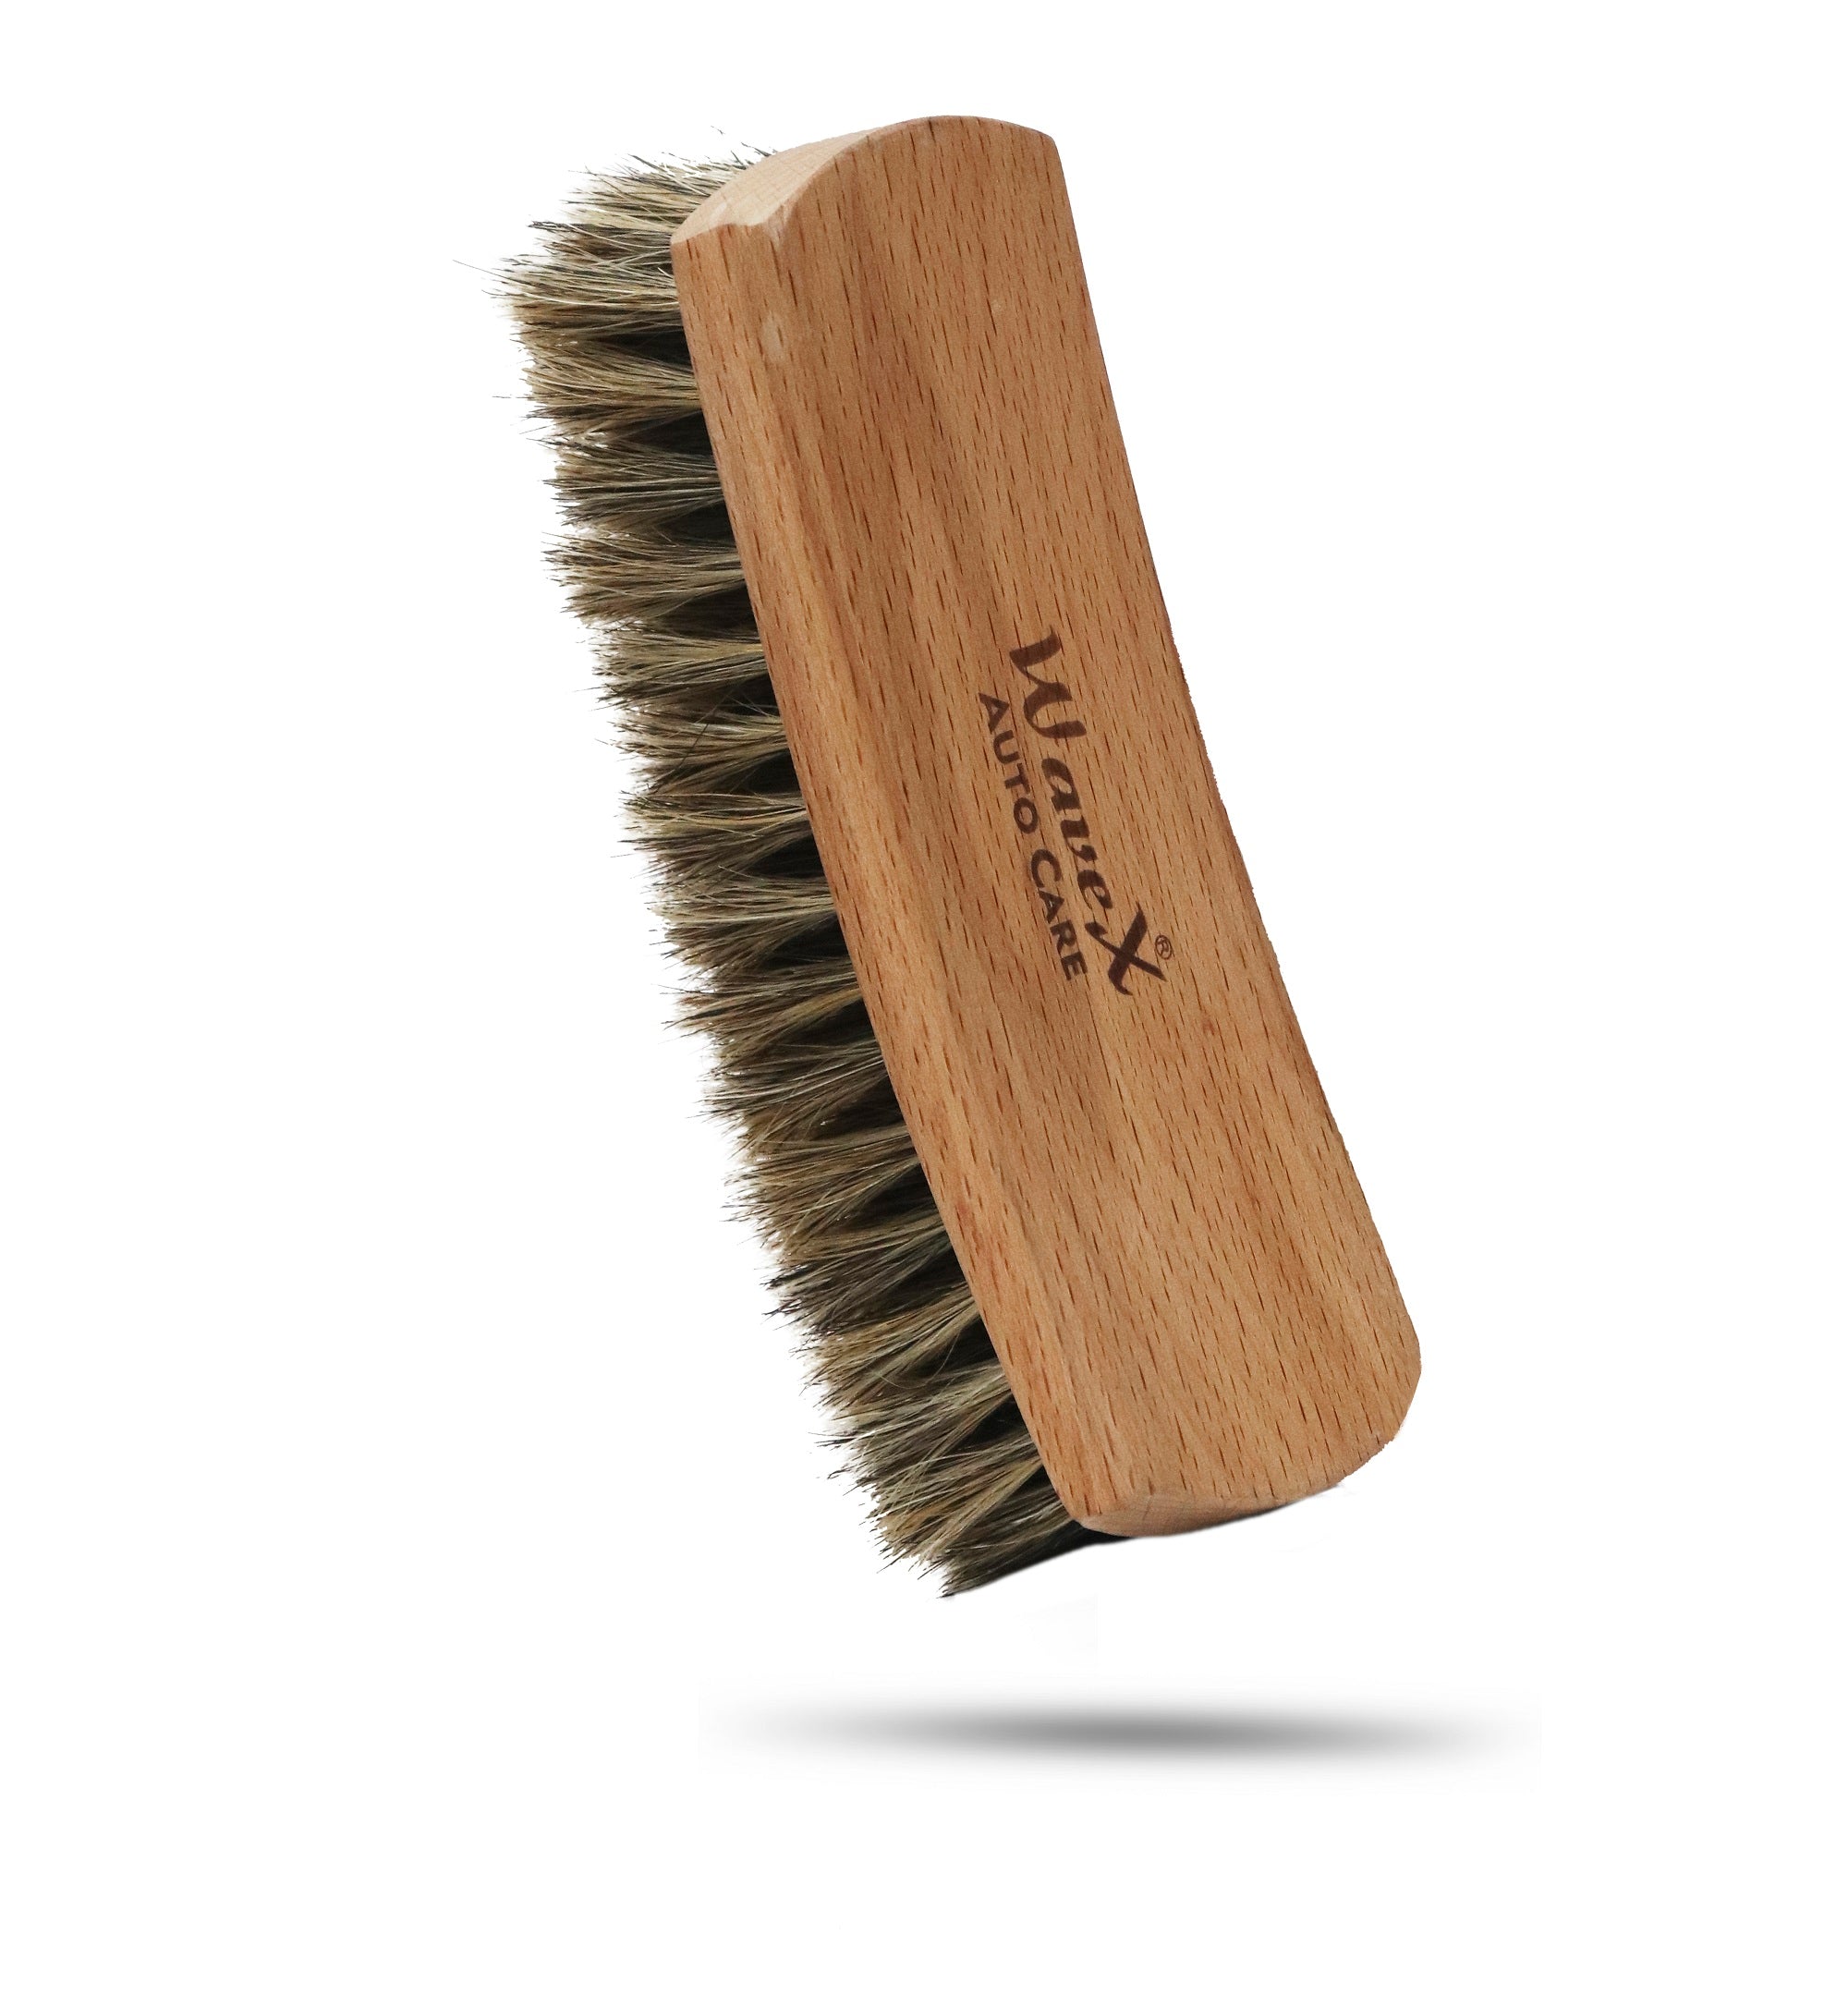 WaveX Premium Car Dashboard, Leather and Interior Detailing Brush | Long Bristle Natural Horse Hair Beach Wood Cleaning And Detailing Brush | For Plastic, Leather, Vinyl, Rubber, Upholstery And Much More.